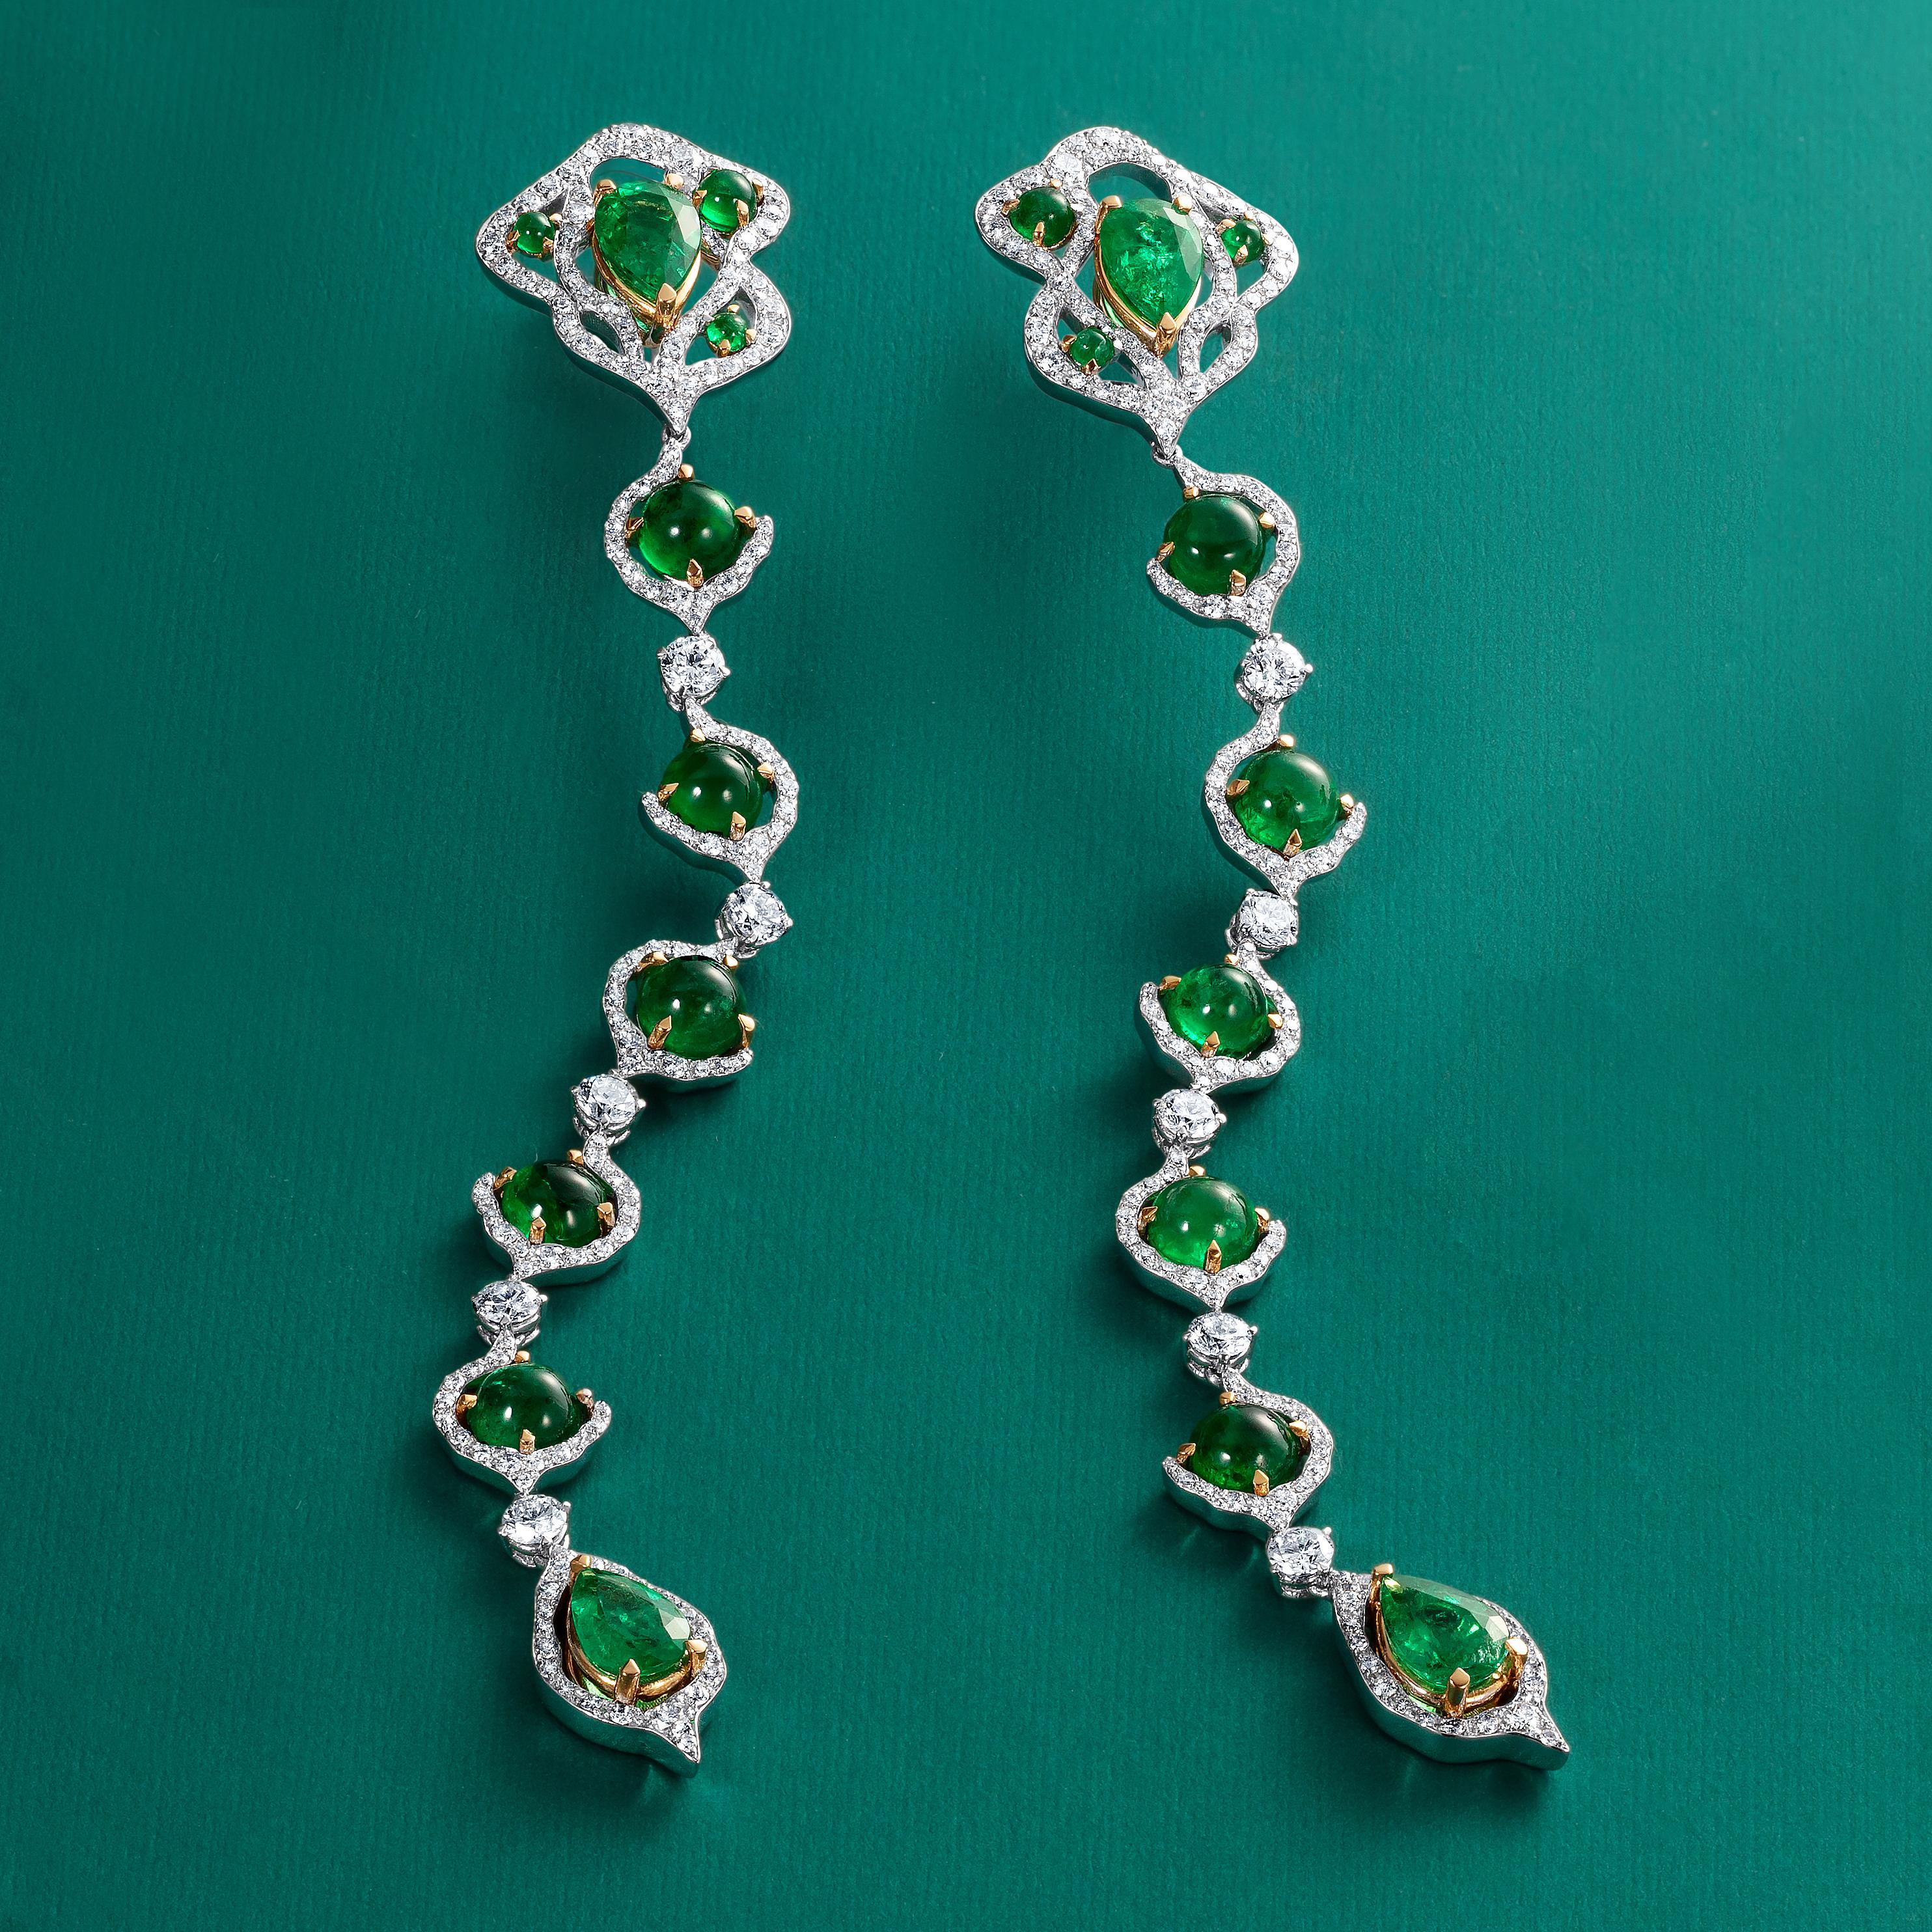 Contemporary 18 Karat White and Yellow Gold, White Diamonds and Emeralds Stiletto Earrings For Sale